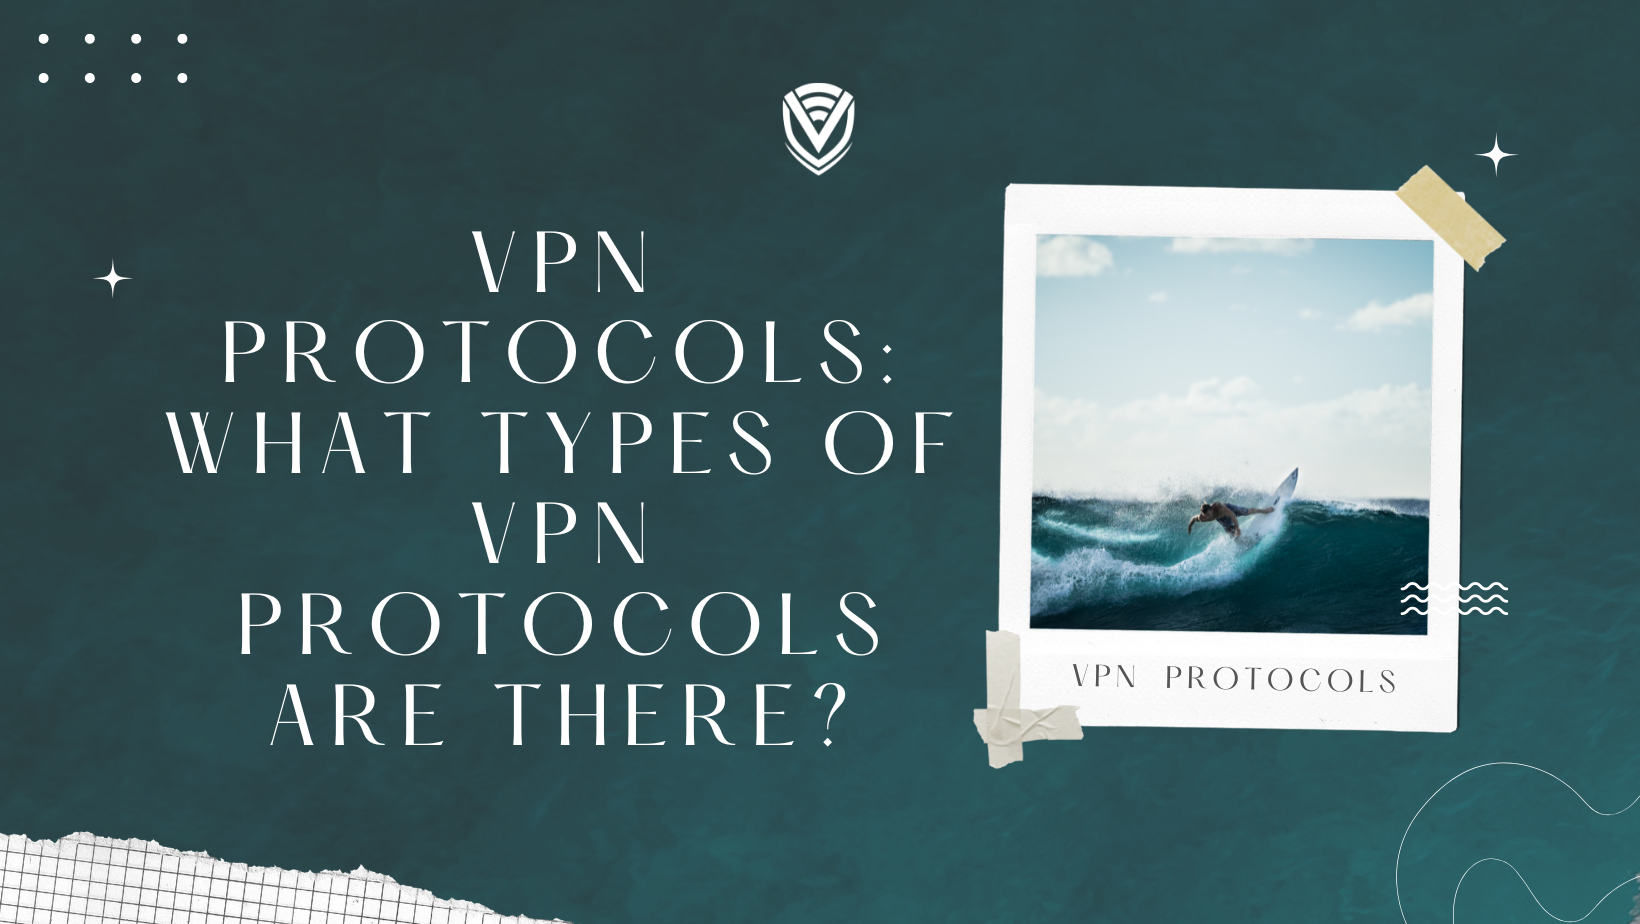 VPN Protocols: What Types of VPN Protocols Are There?